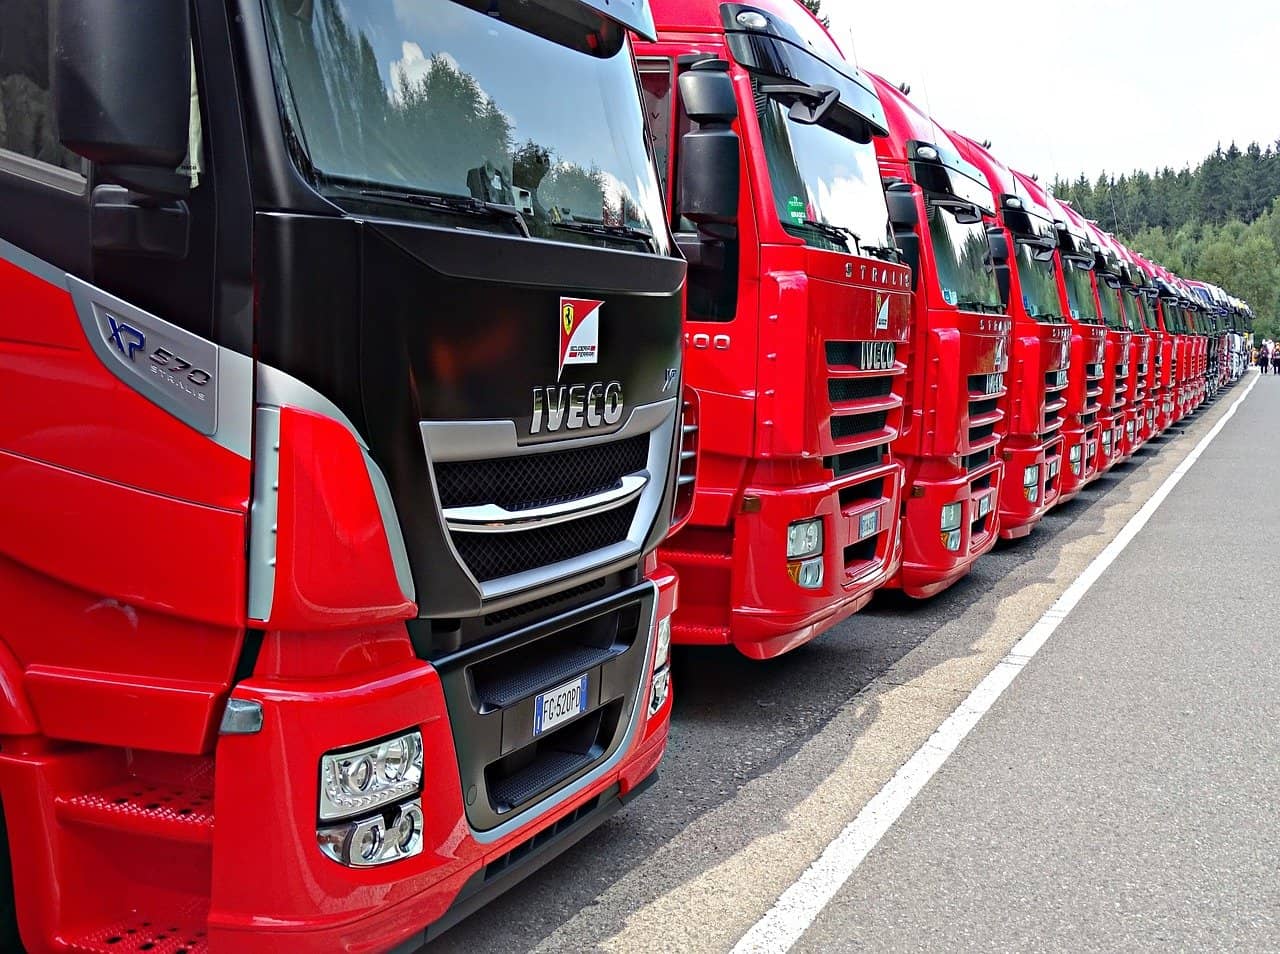 A number of red trucks parked side by side